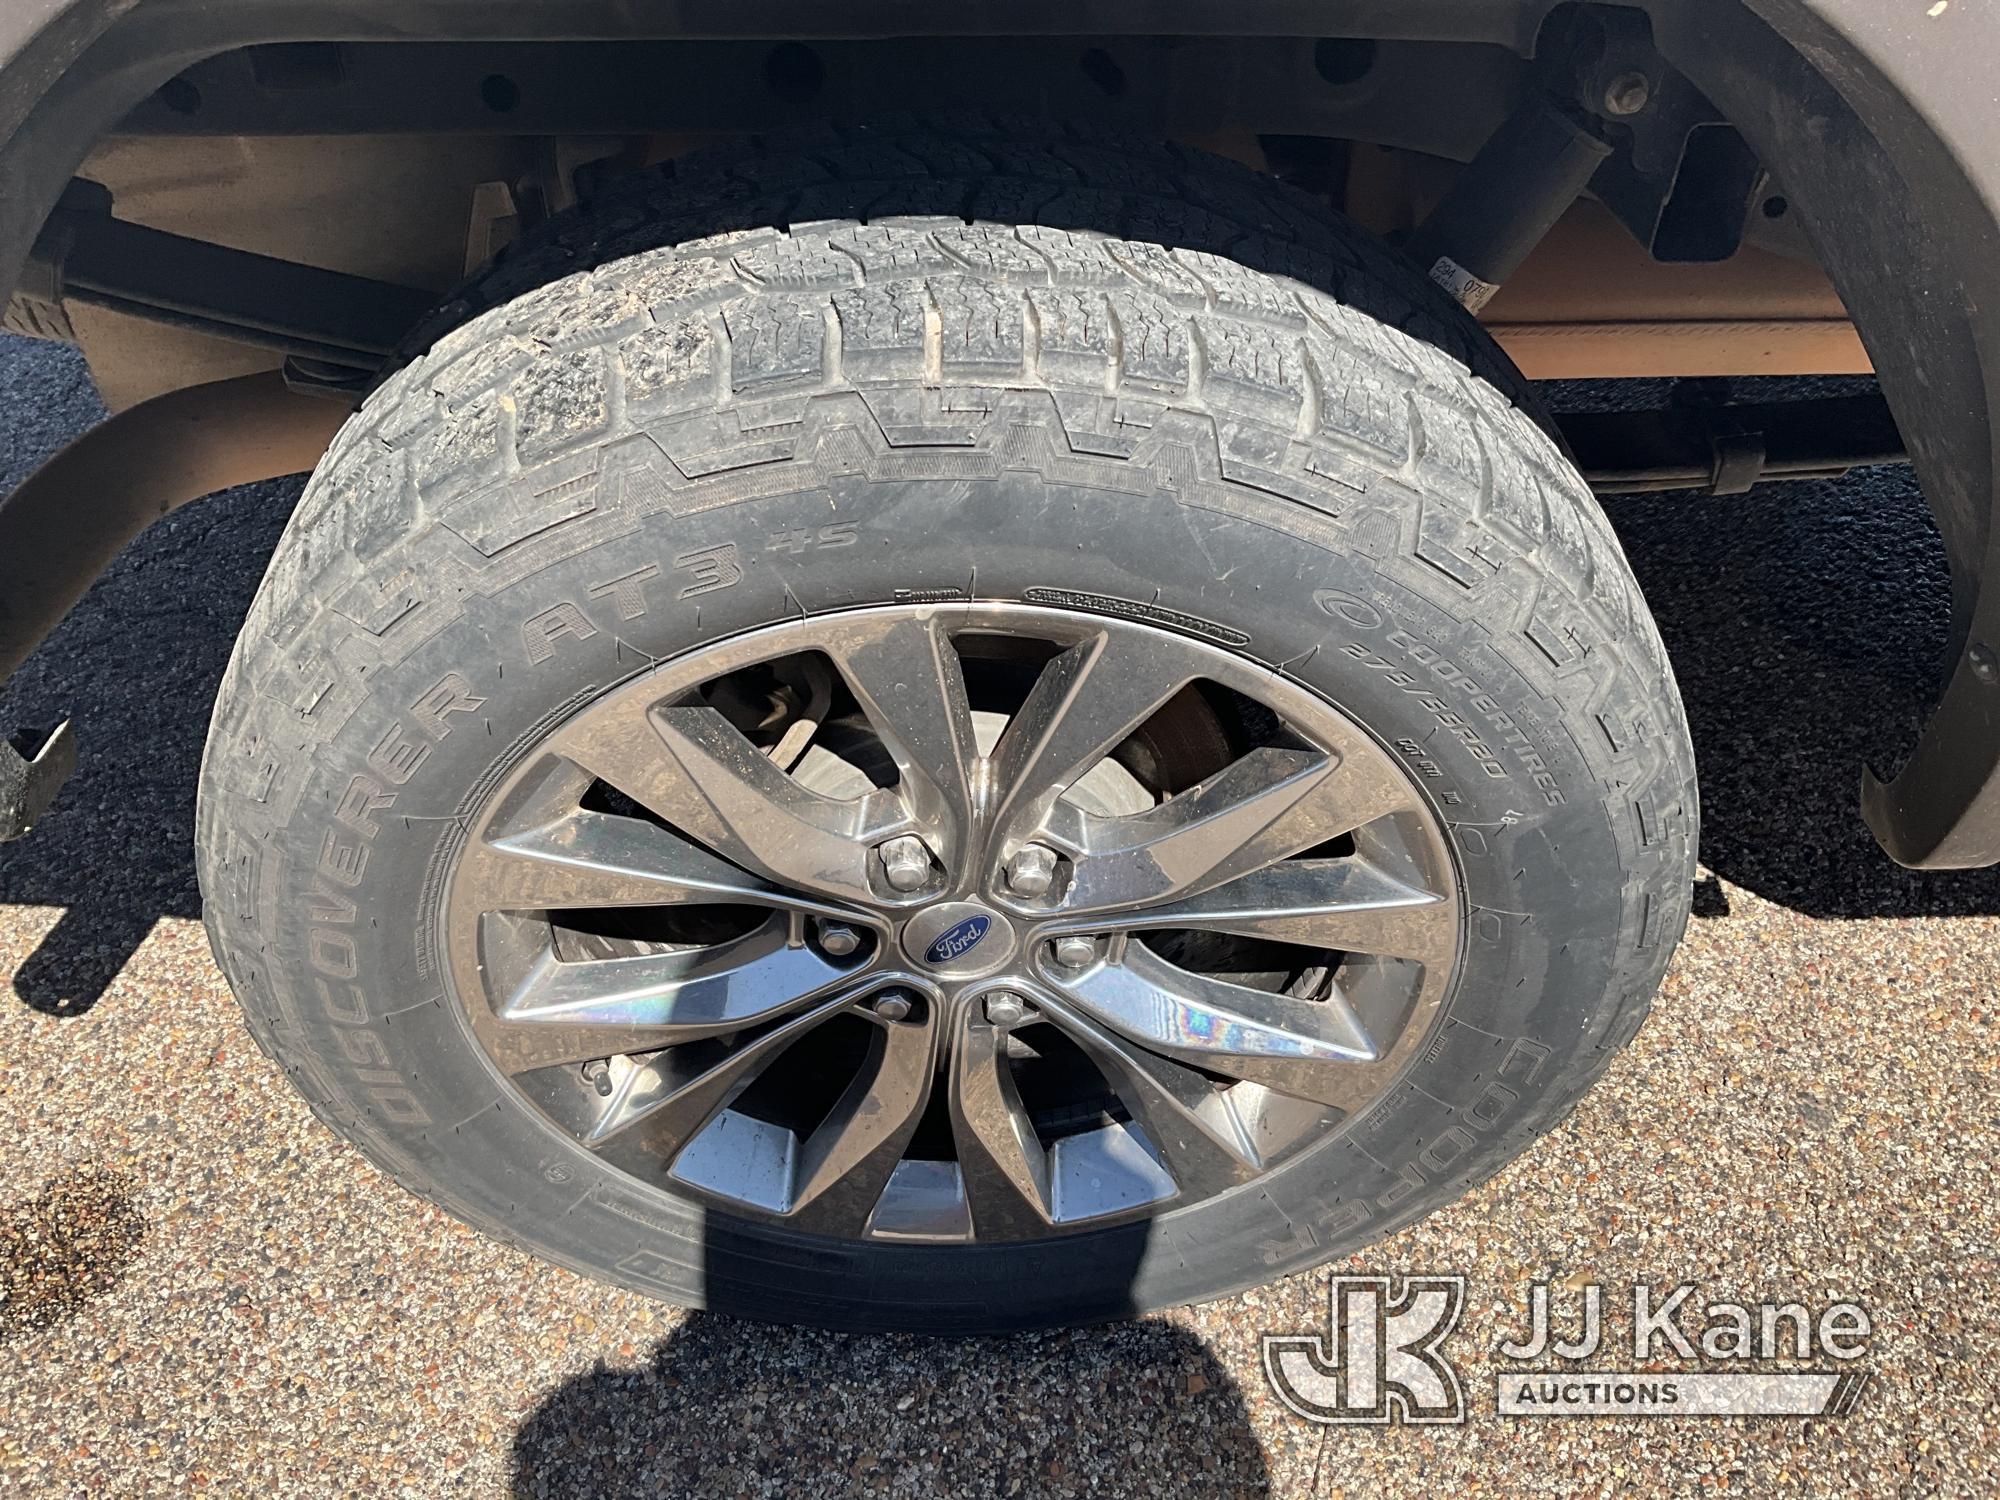 (Roby, TX) 2016 Ford F150 4x4 Crew-Cab Pickup Truck, Cooperative owned Runs and Moves, Per Seller Ne